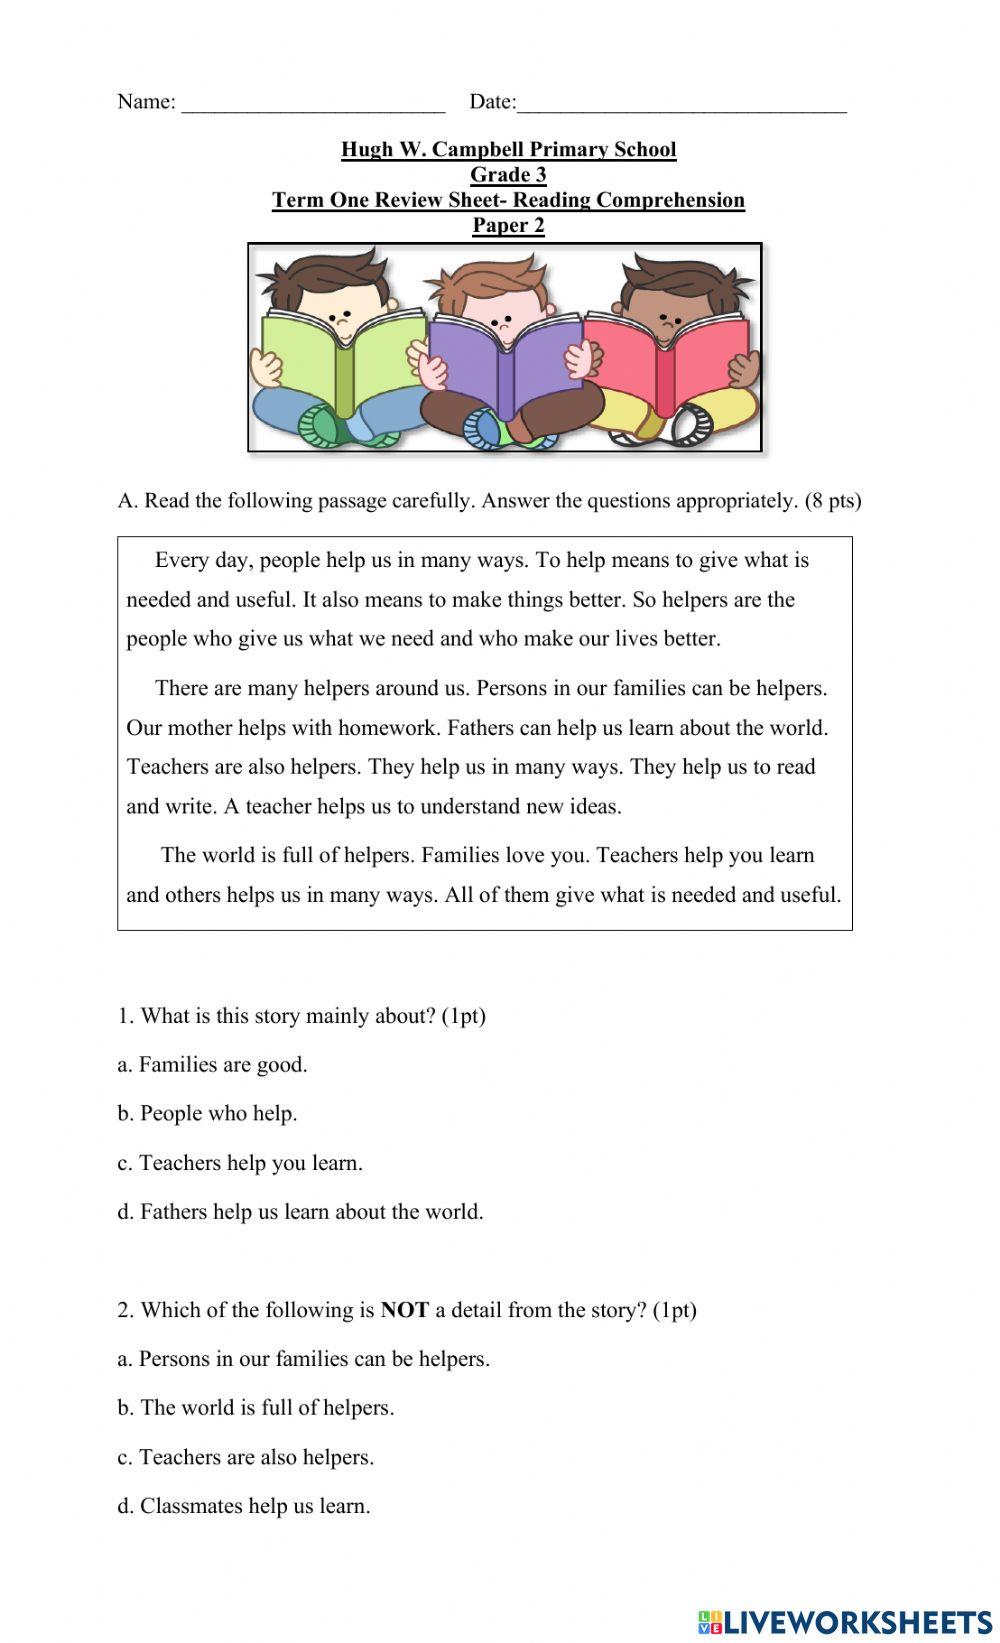 Reading Comprehension Review Sheet 2